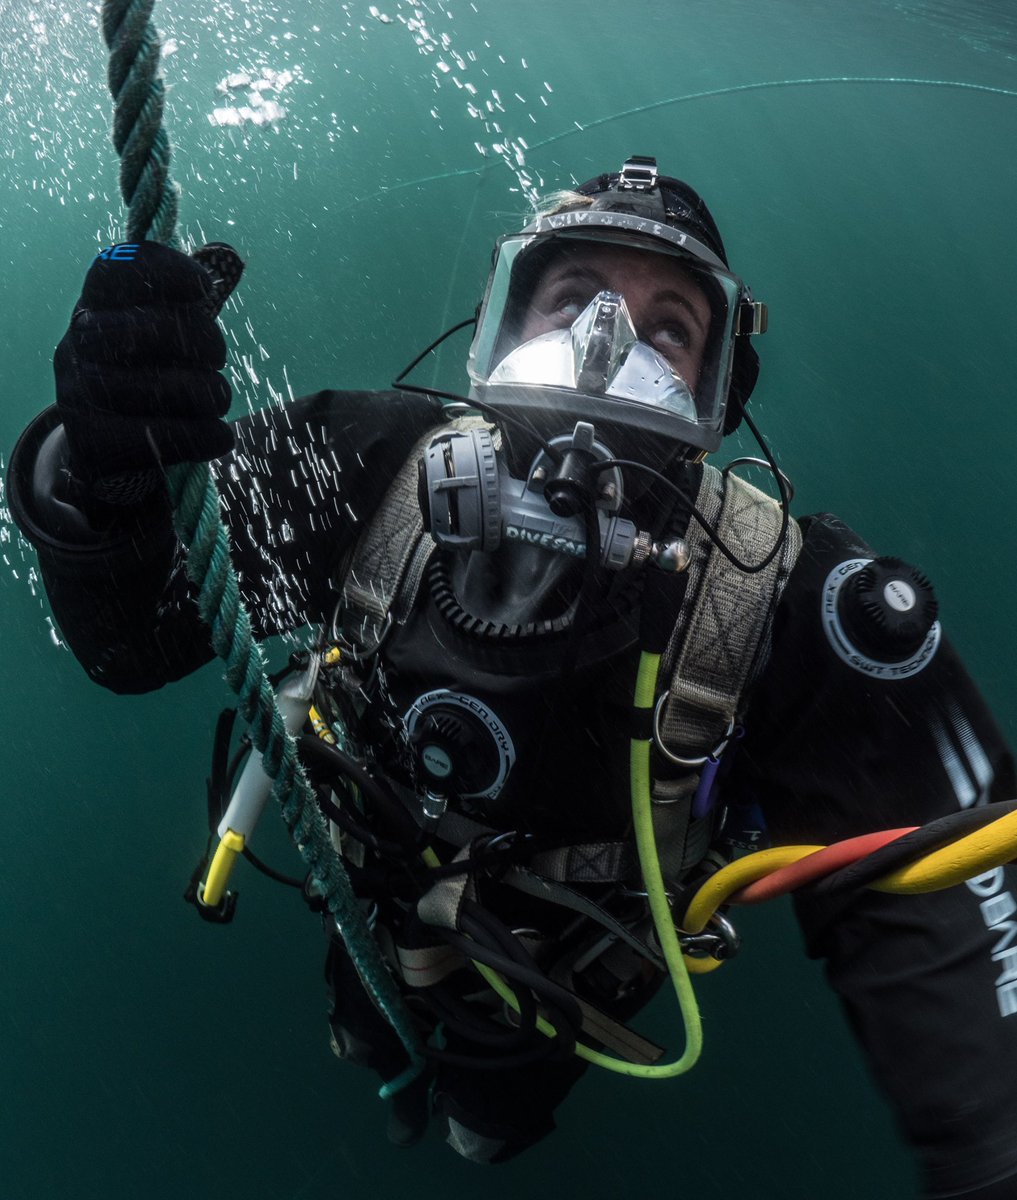 How's it hanging?

#DiveTraining #SurfaceSupply #DiveSchool #canadiandiver #diveday #thatdivegeartho #divecanada #drysuitdiving #canadadivers #canadianschool #surfacesupply #Divinggear #Drysuitdiving #divesafe #diveschool #livetodive #divingislife #divingcourse